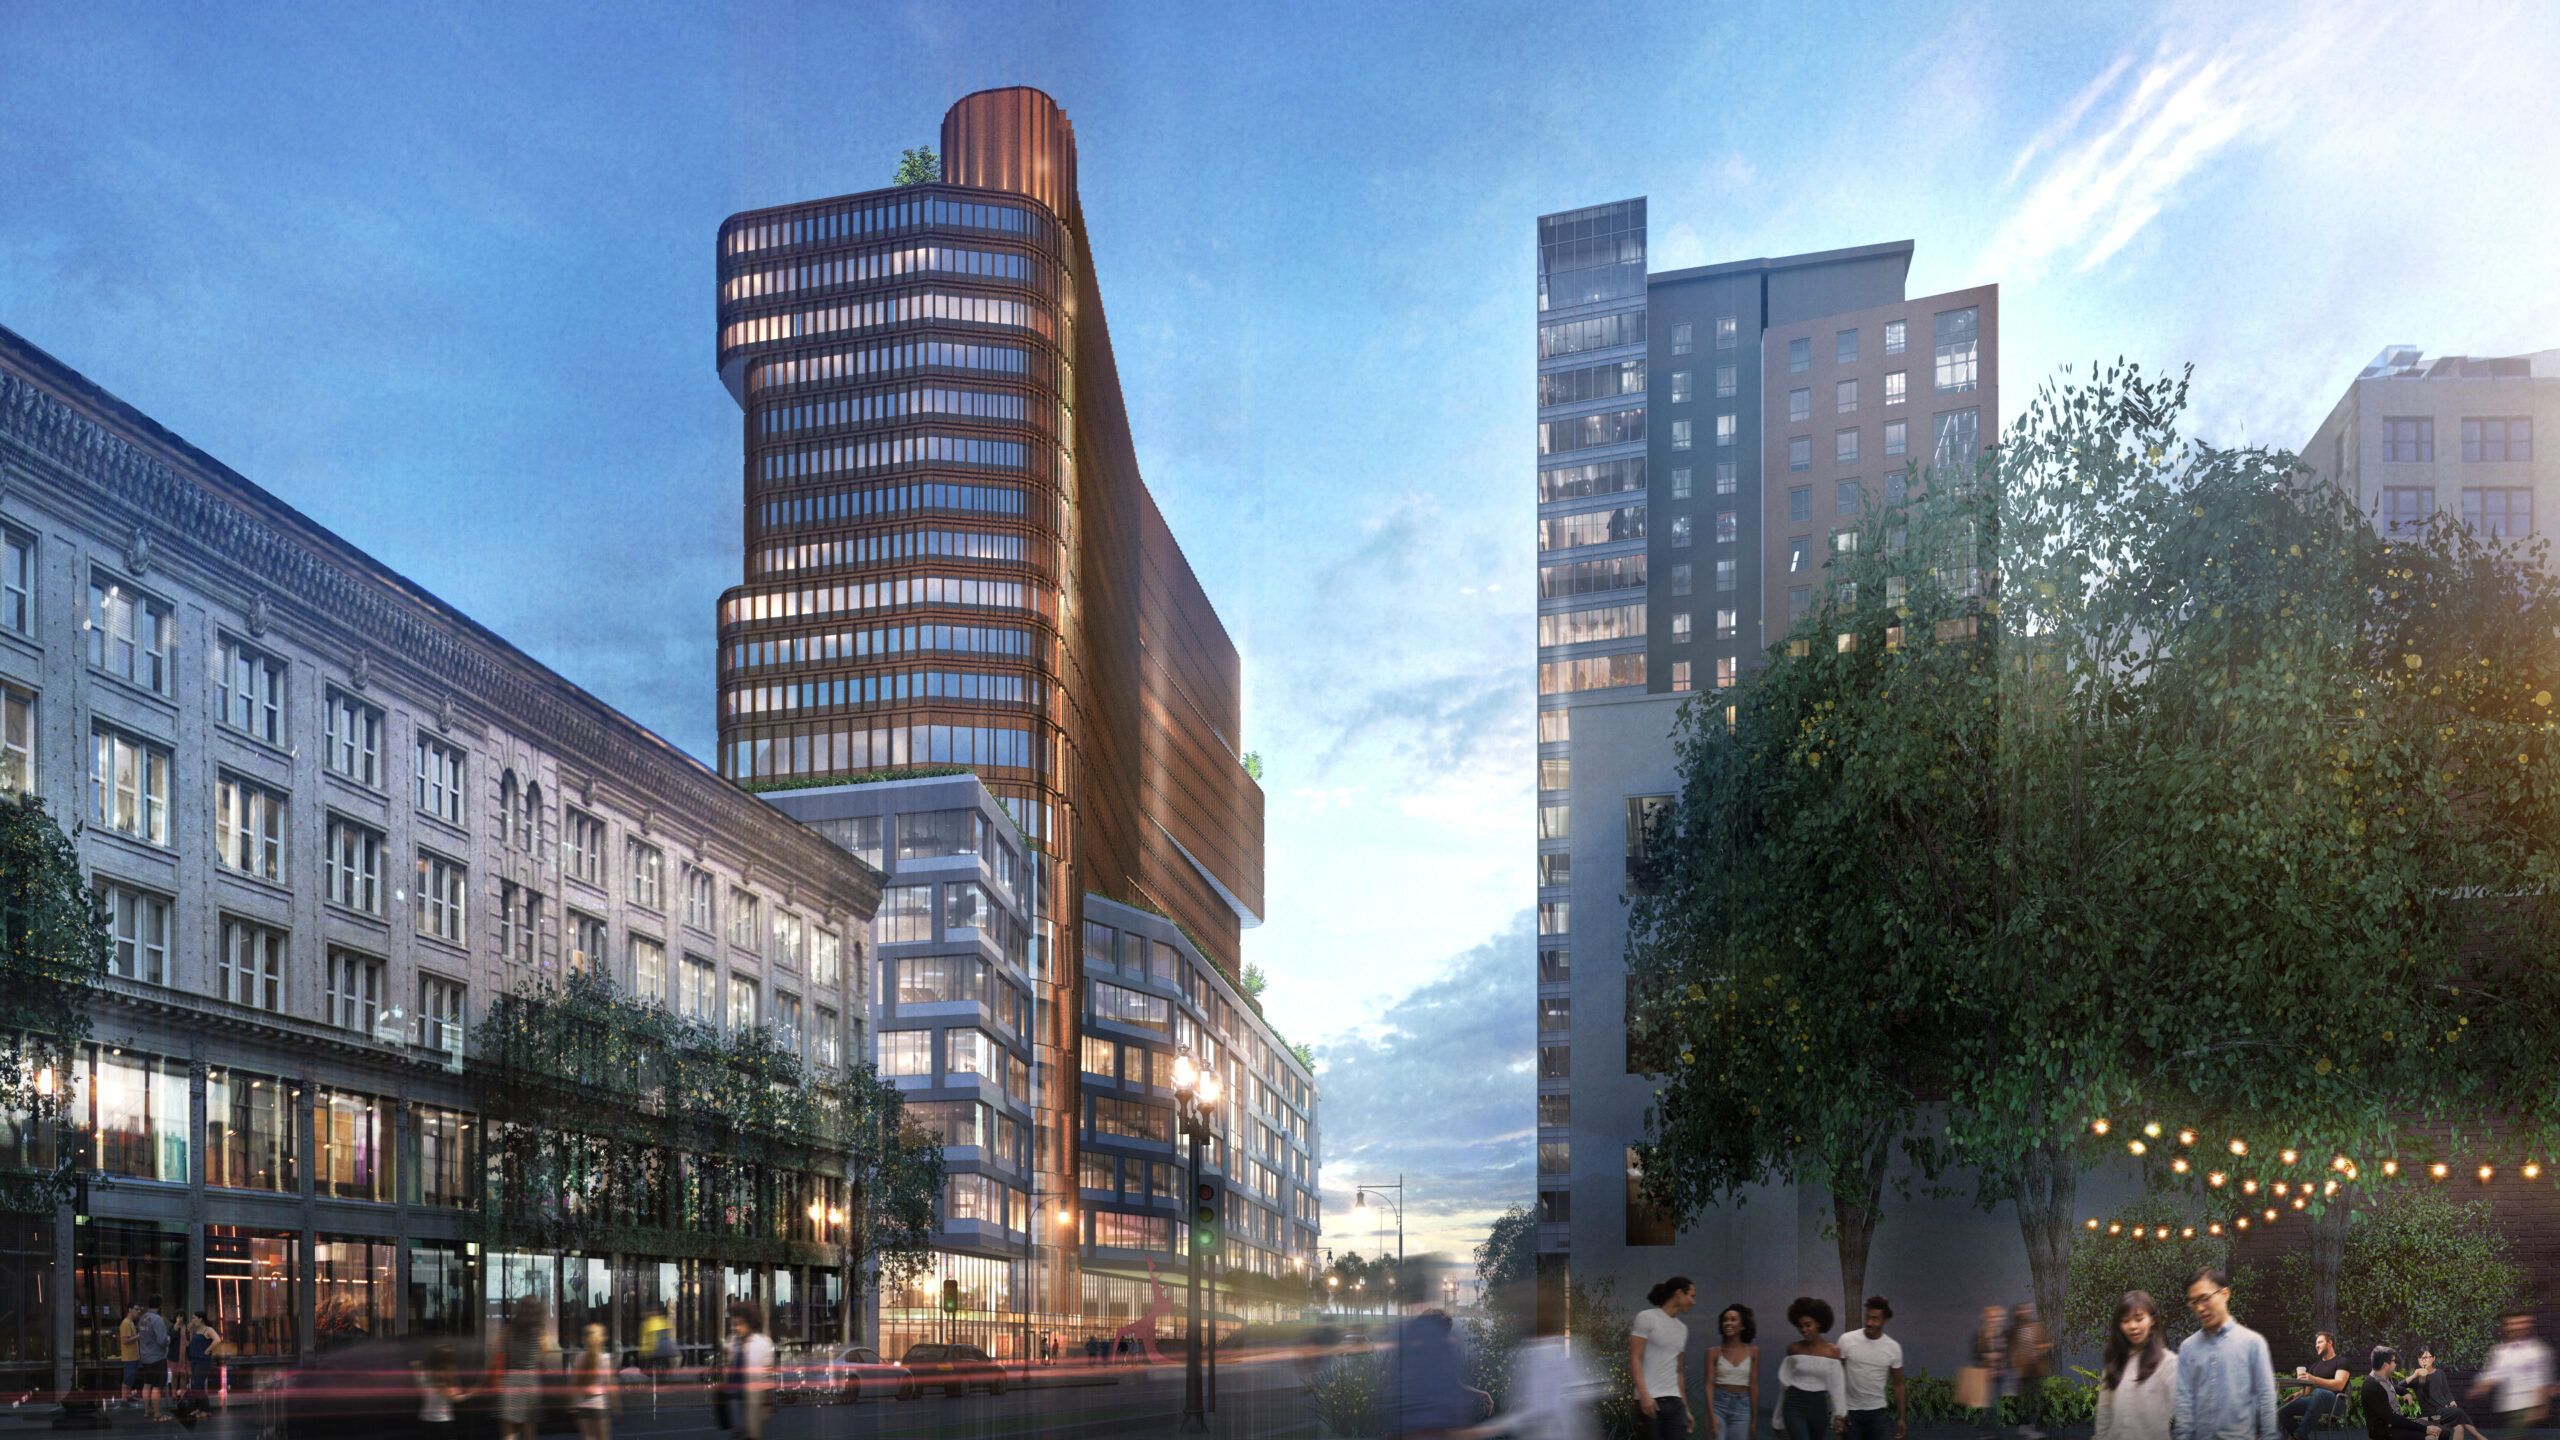 MassDOT selects Zero Greenway team to redevelop Parcel 25 in Boston